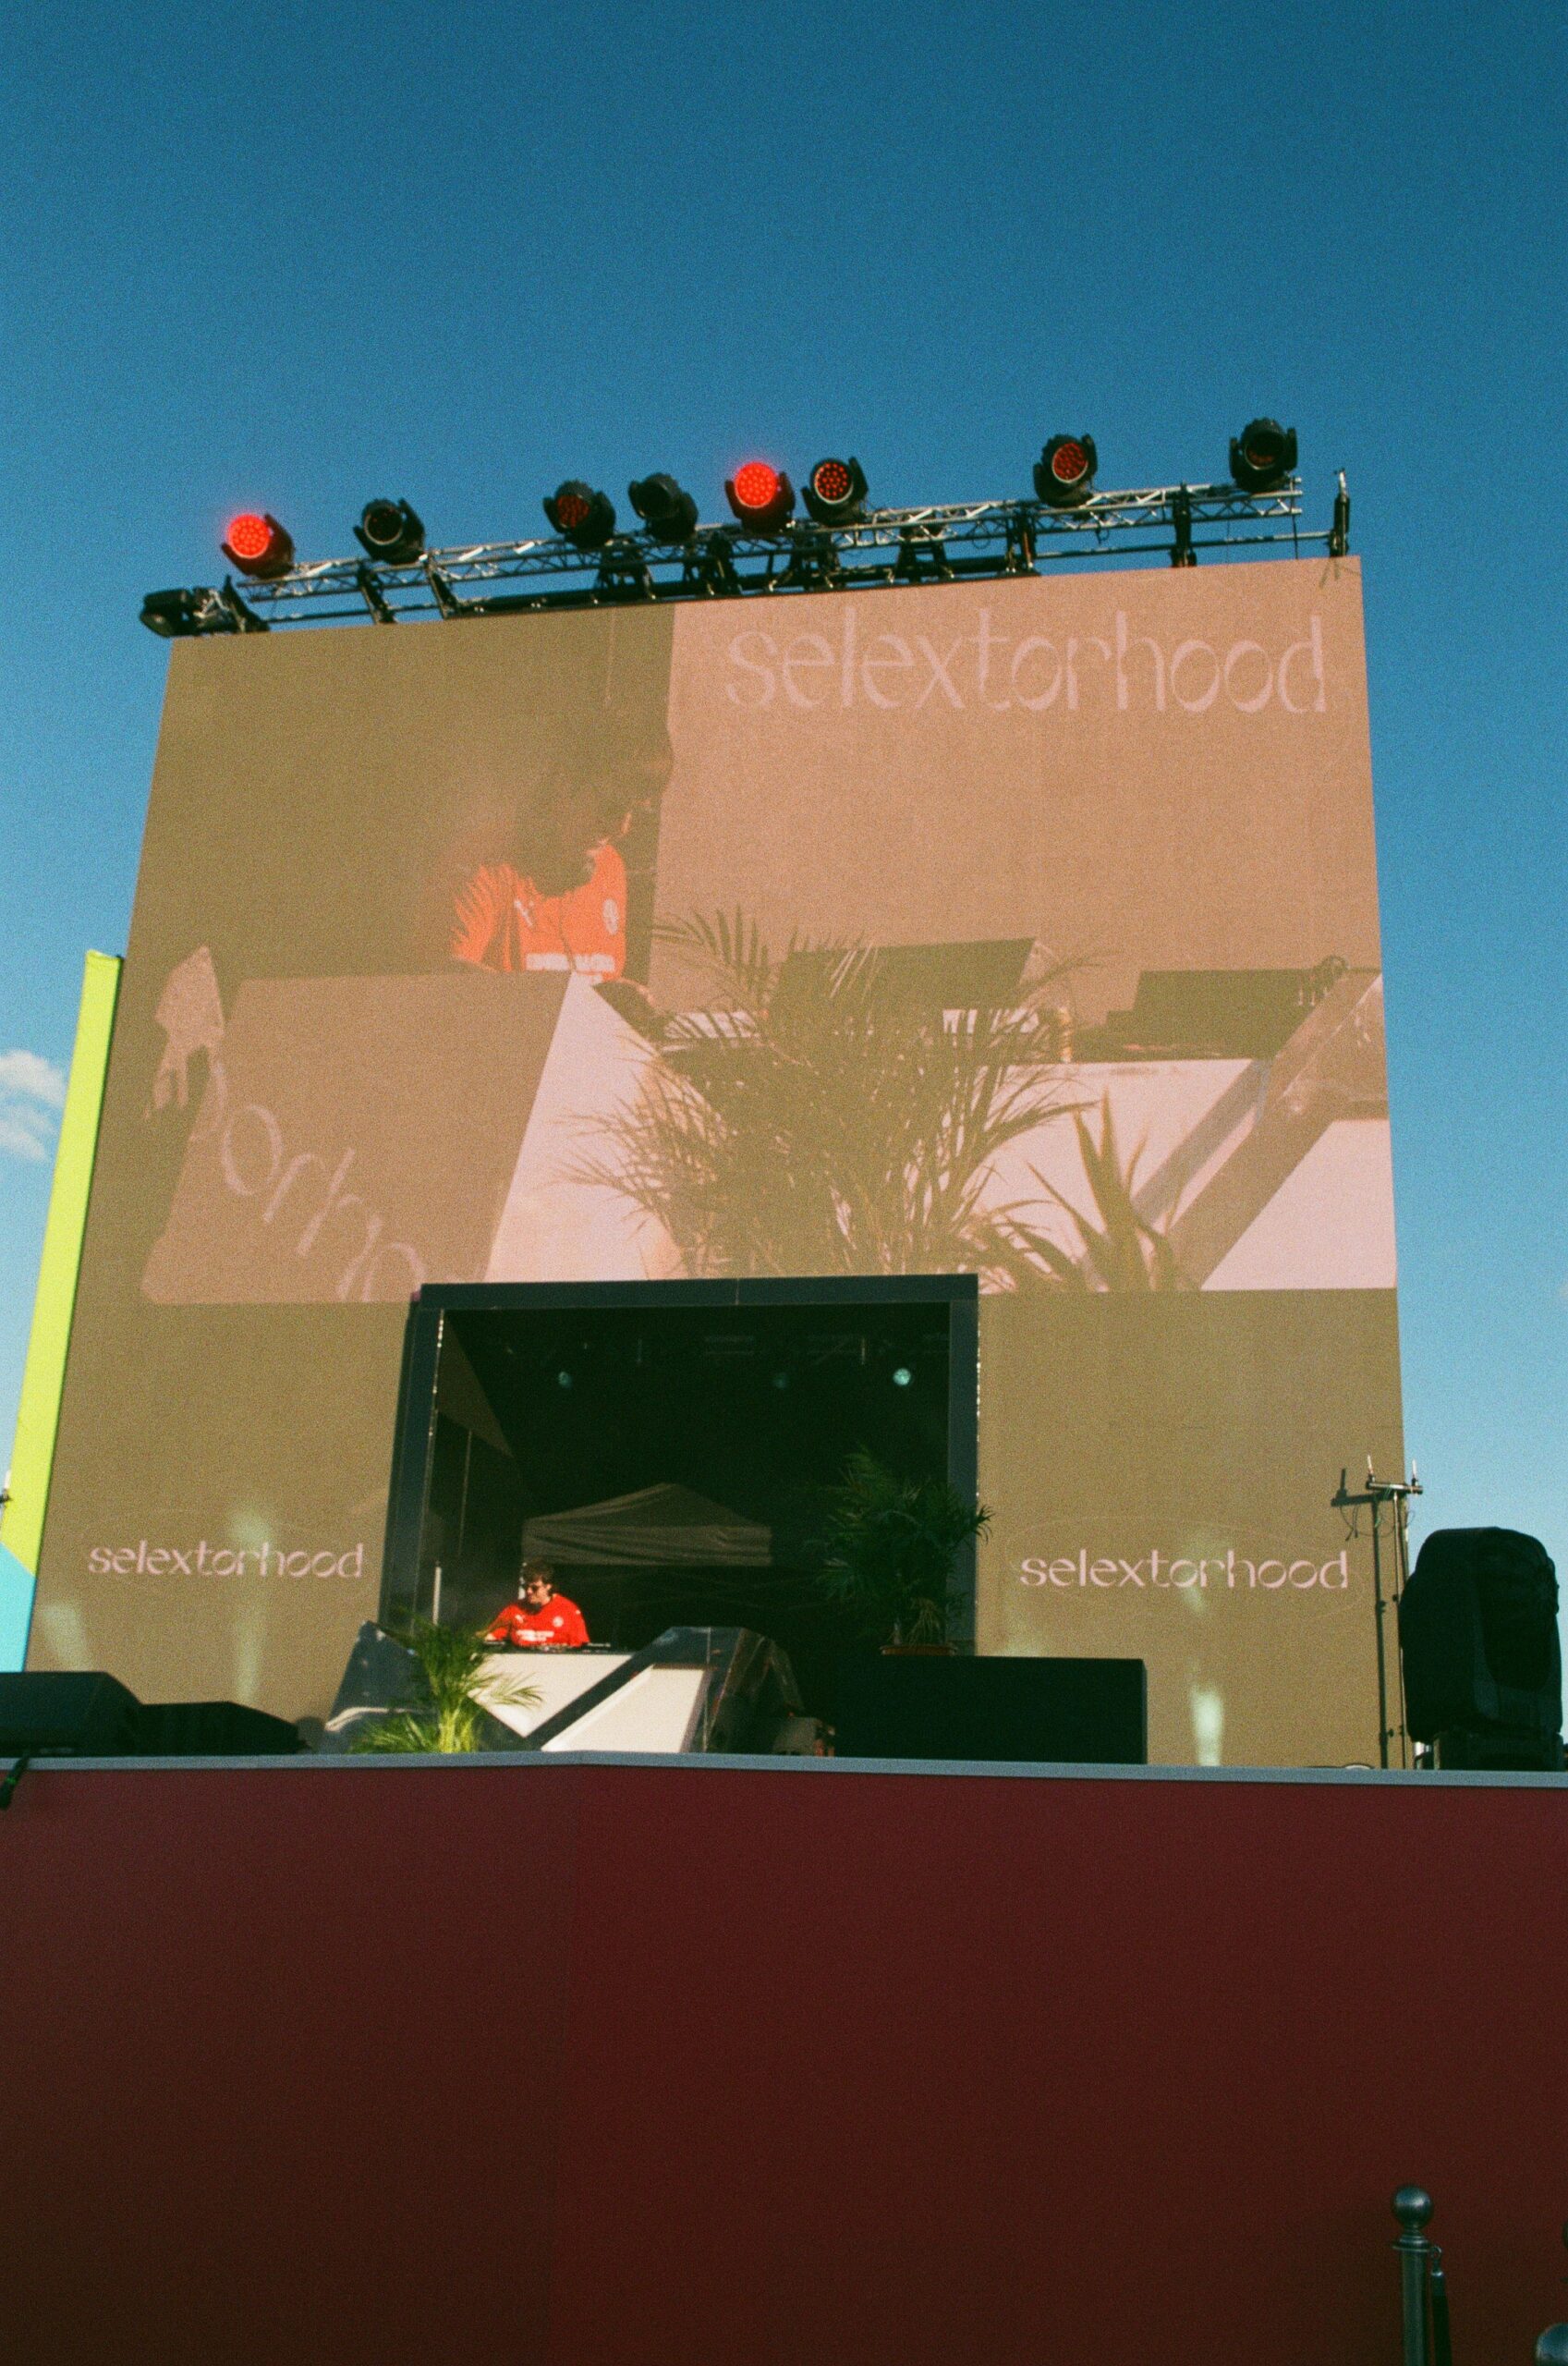 Me DJing on a huge stage at Smithfield as part of the Commonwealth Games 2022